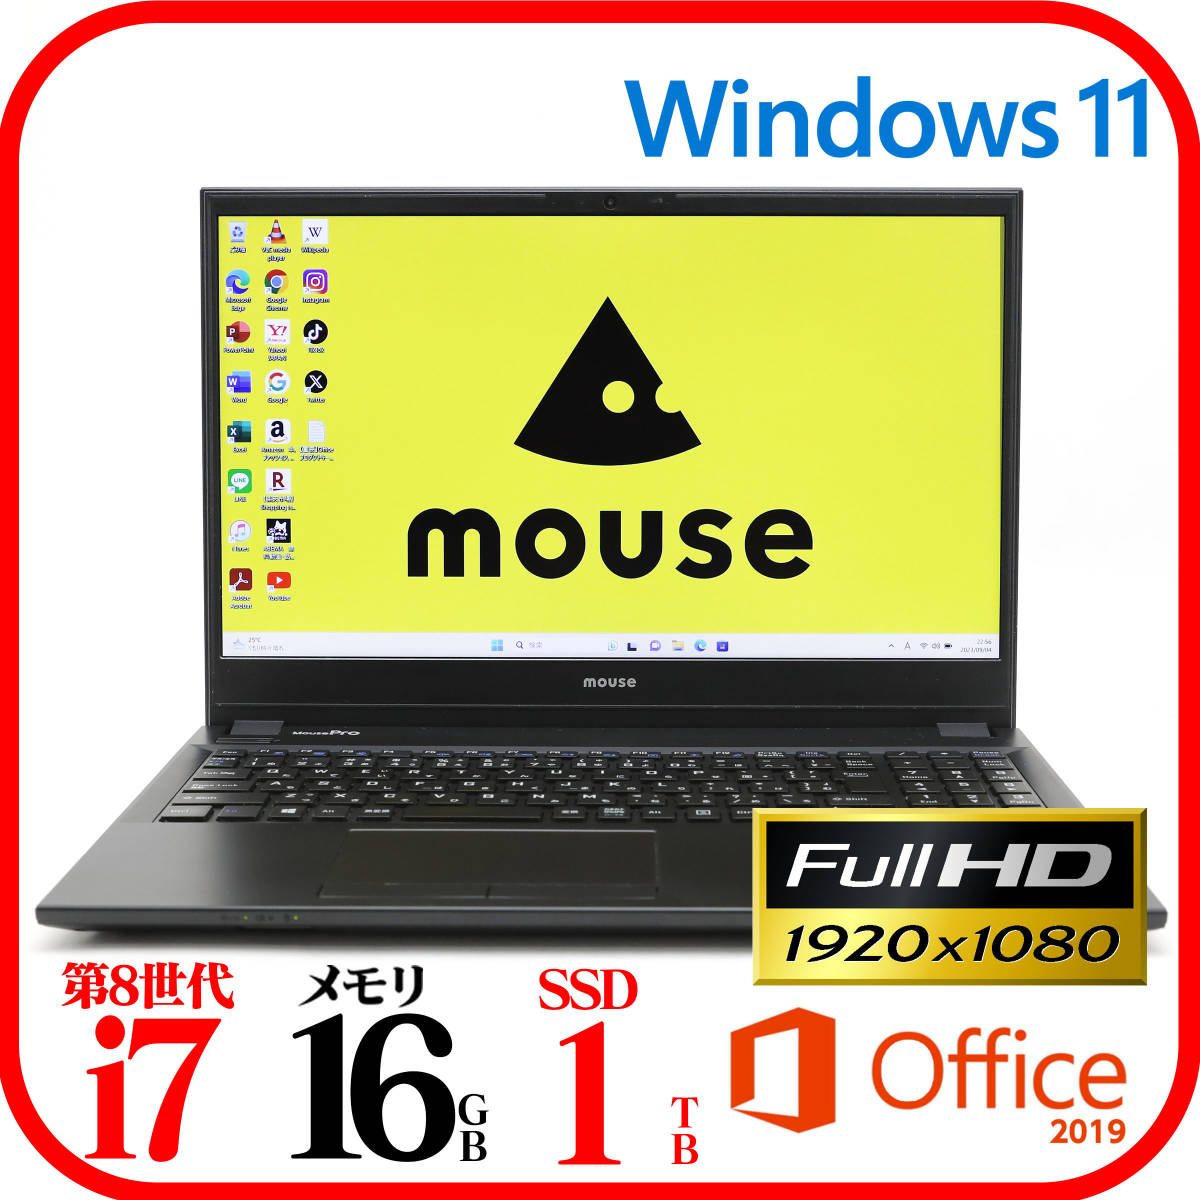 Mouse computer - Notebook - Windows - Personal computer - Computer 